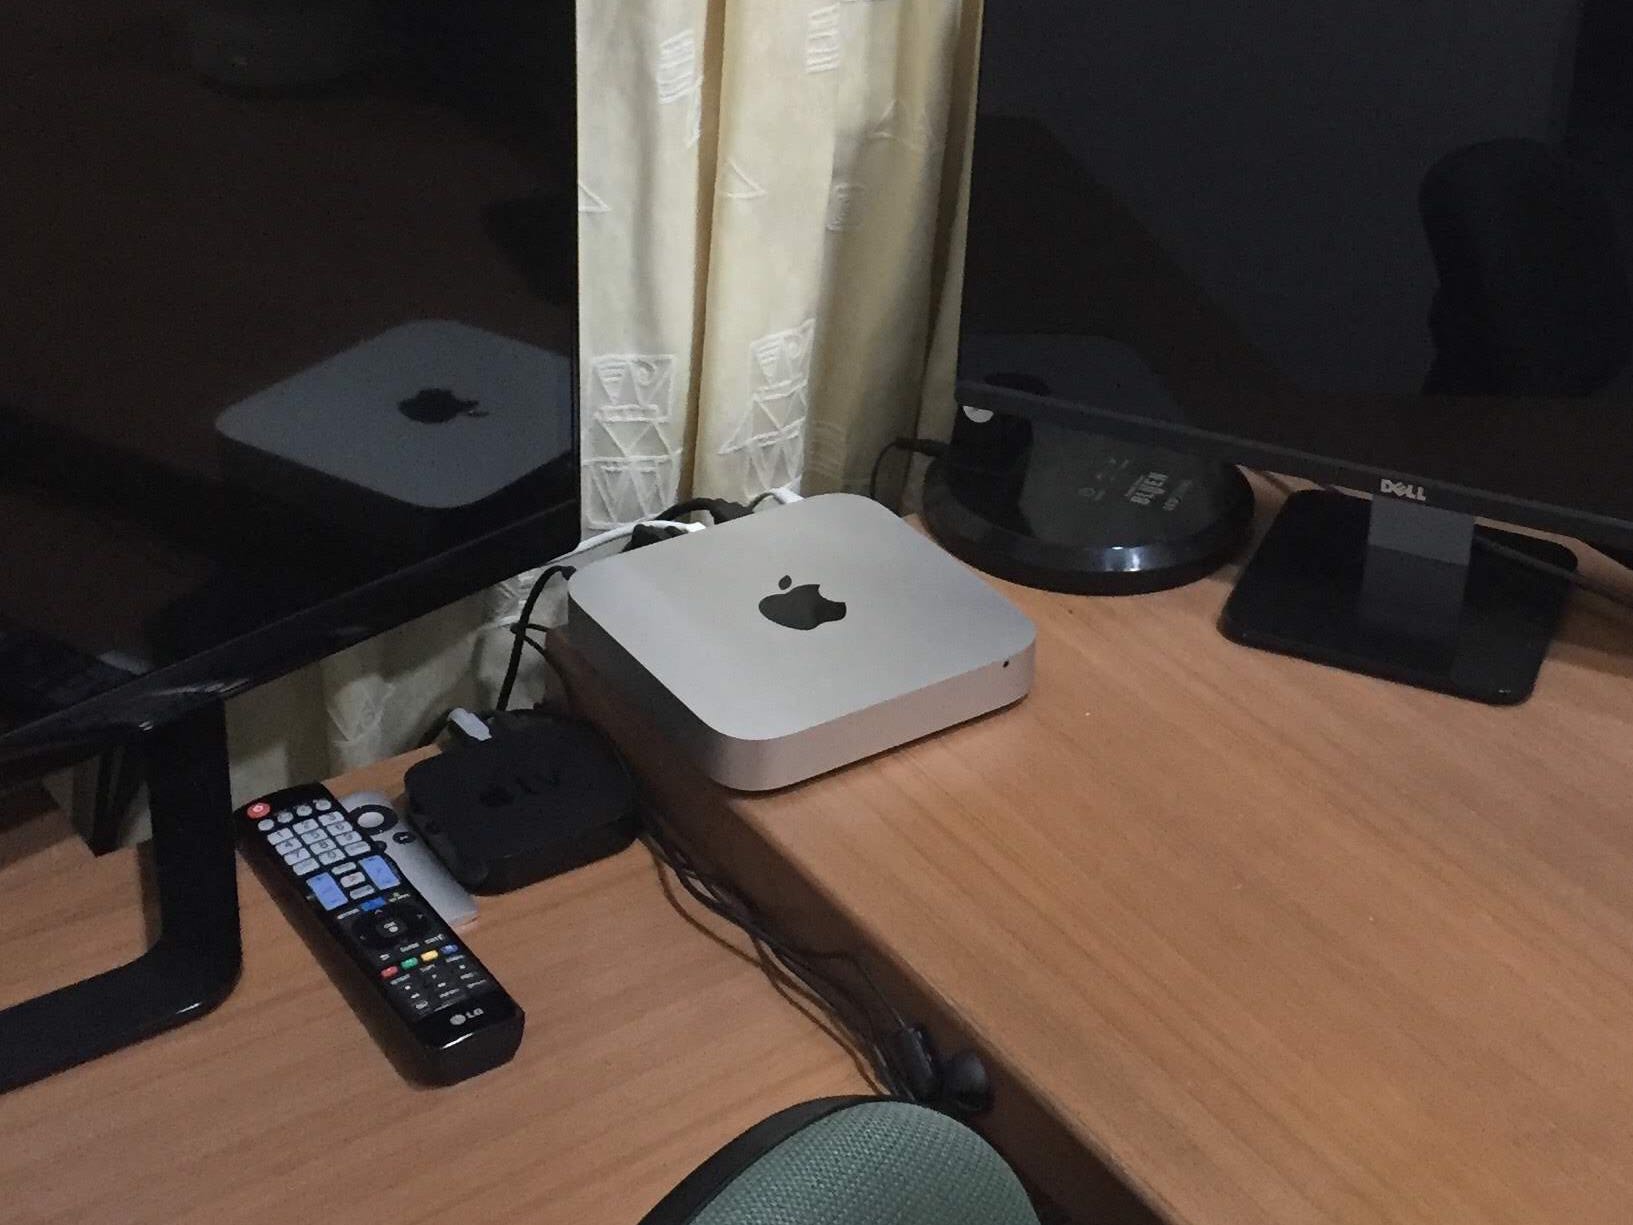 What is the price for a used 2014 mac mini with 2.6 turborboost 8gb and 256 ssd drives